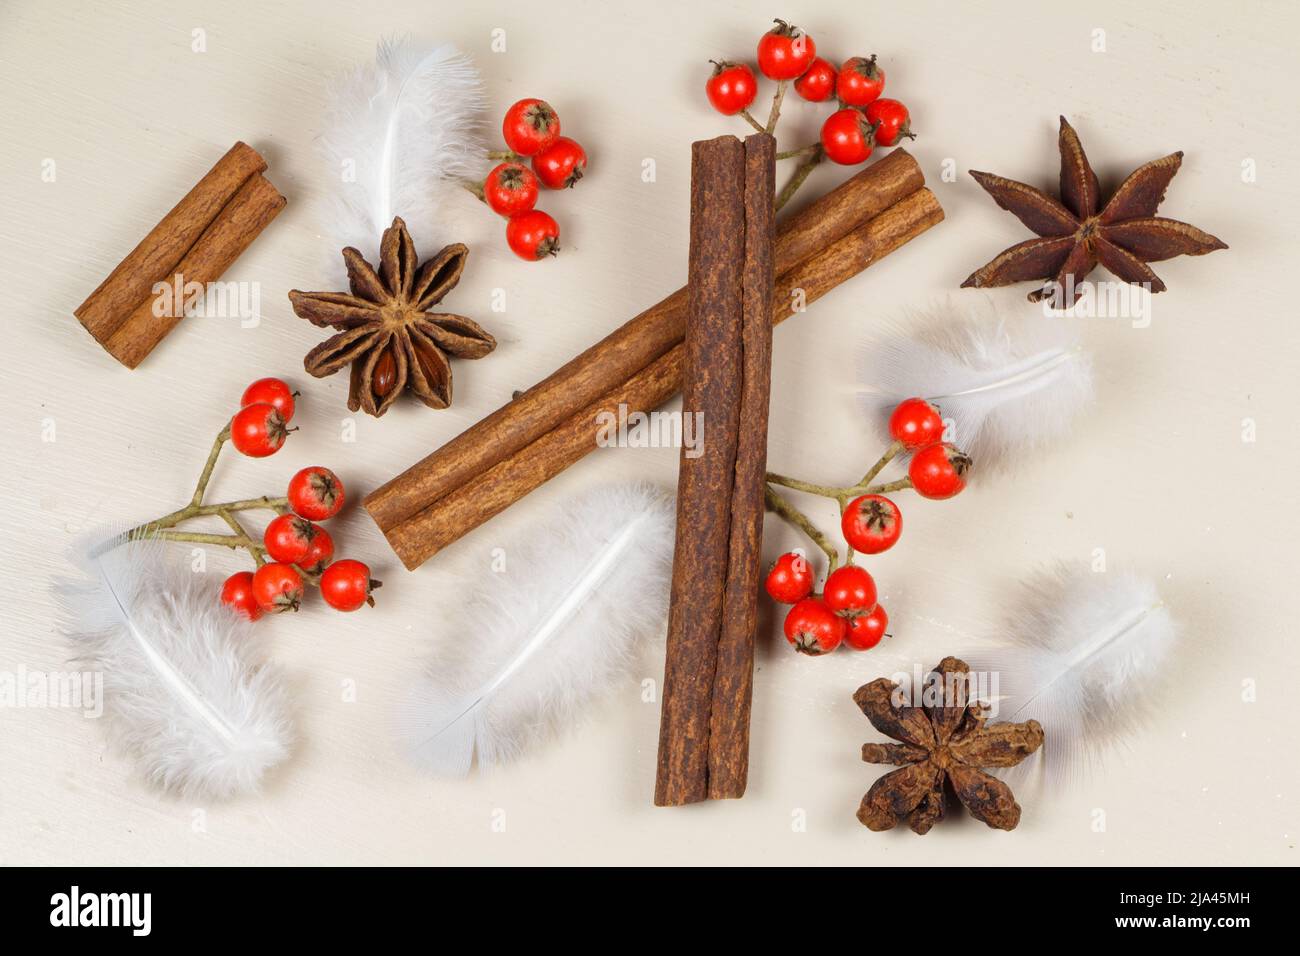 Cinnamon sticks, star anise, feather and red berries as decoration for Christmas Stock Photo